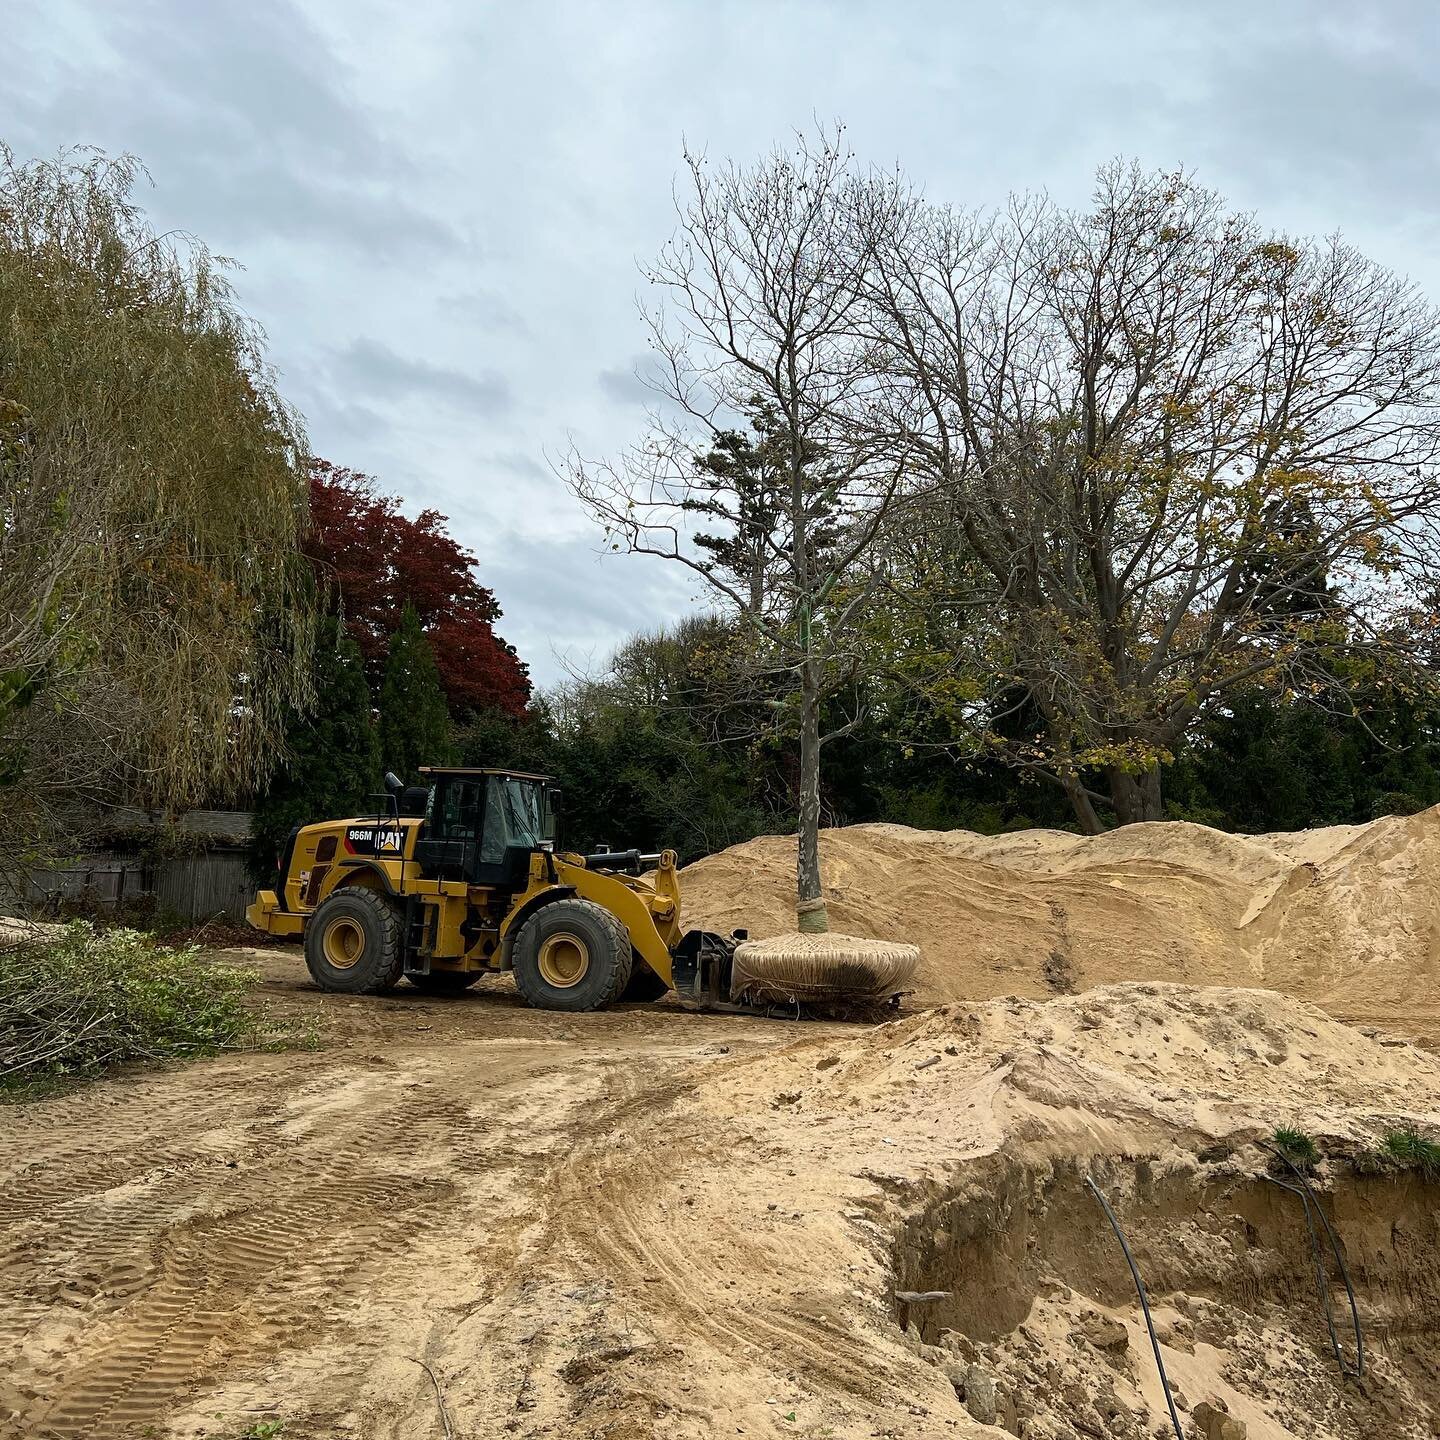 Installing a London Plane tree before access is cut off on new construction project .  #hamptonslandscaping #treemoving #gardening #caterpillar